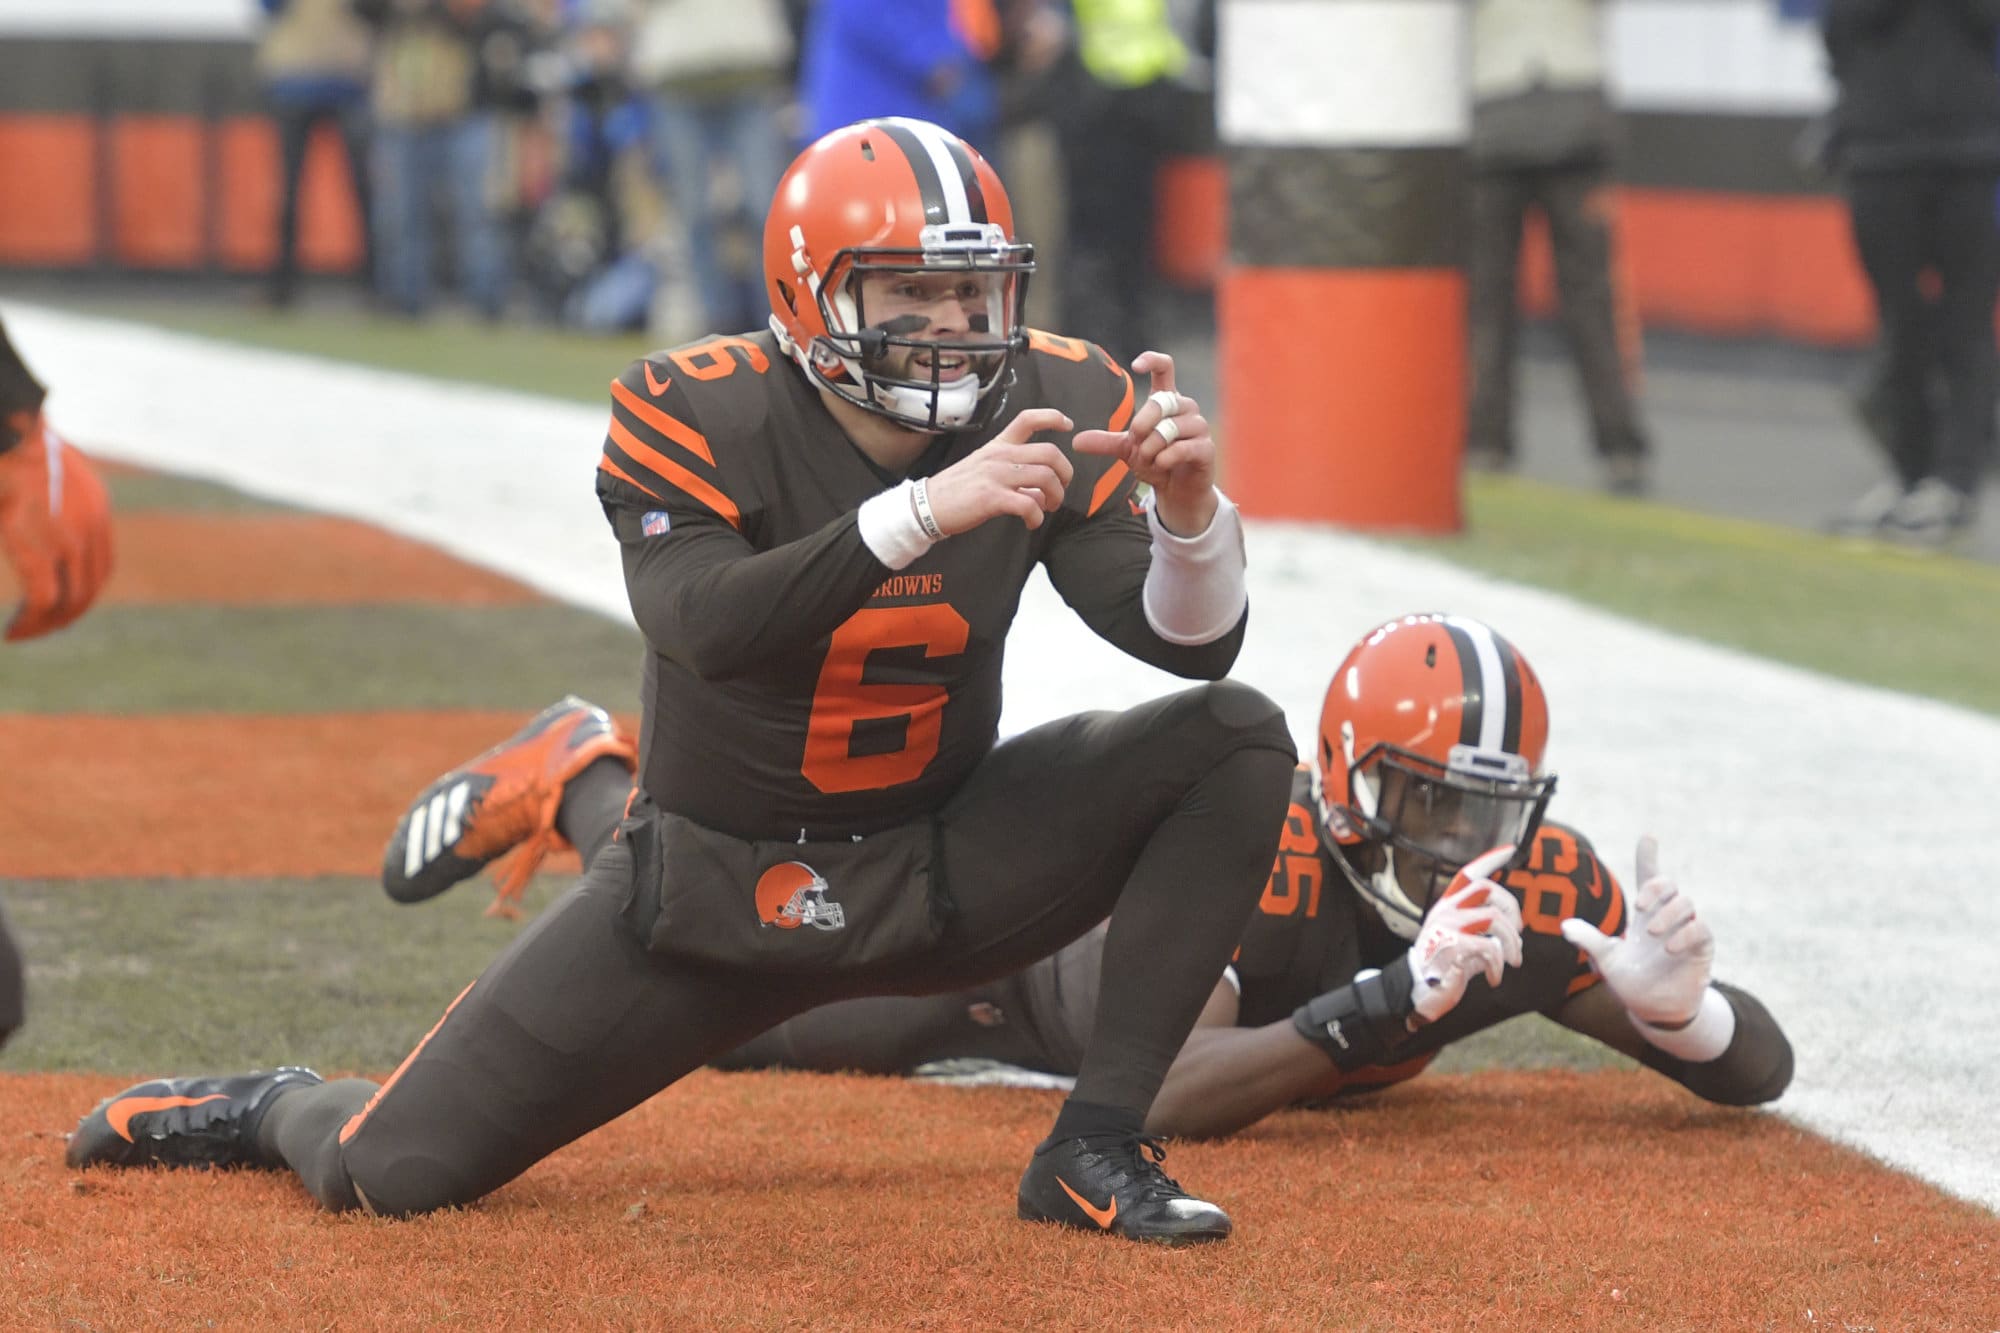 Cleveland Browns quarterback Baker Mayfield (6) and tight end David Njoku (85) celebrate after a touchdown reception by wide receiver Rashard Higgins (not pictured) in the third quarter of an NFL football game against the Cincinnati Bengals, Sunday, Dec. 23, 2018, in Cleveland. The Browns won 28-16. (AP Photo/David Richard)